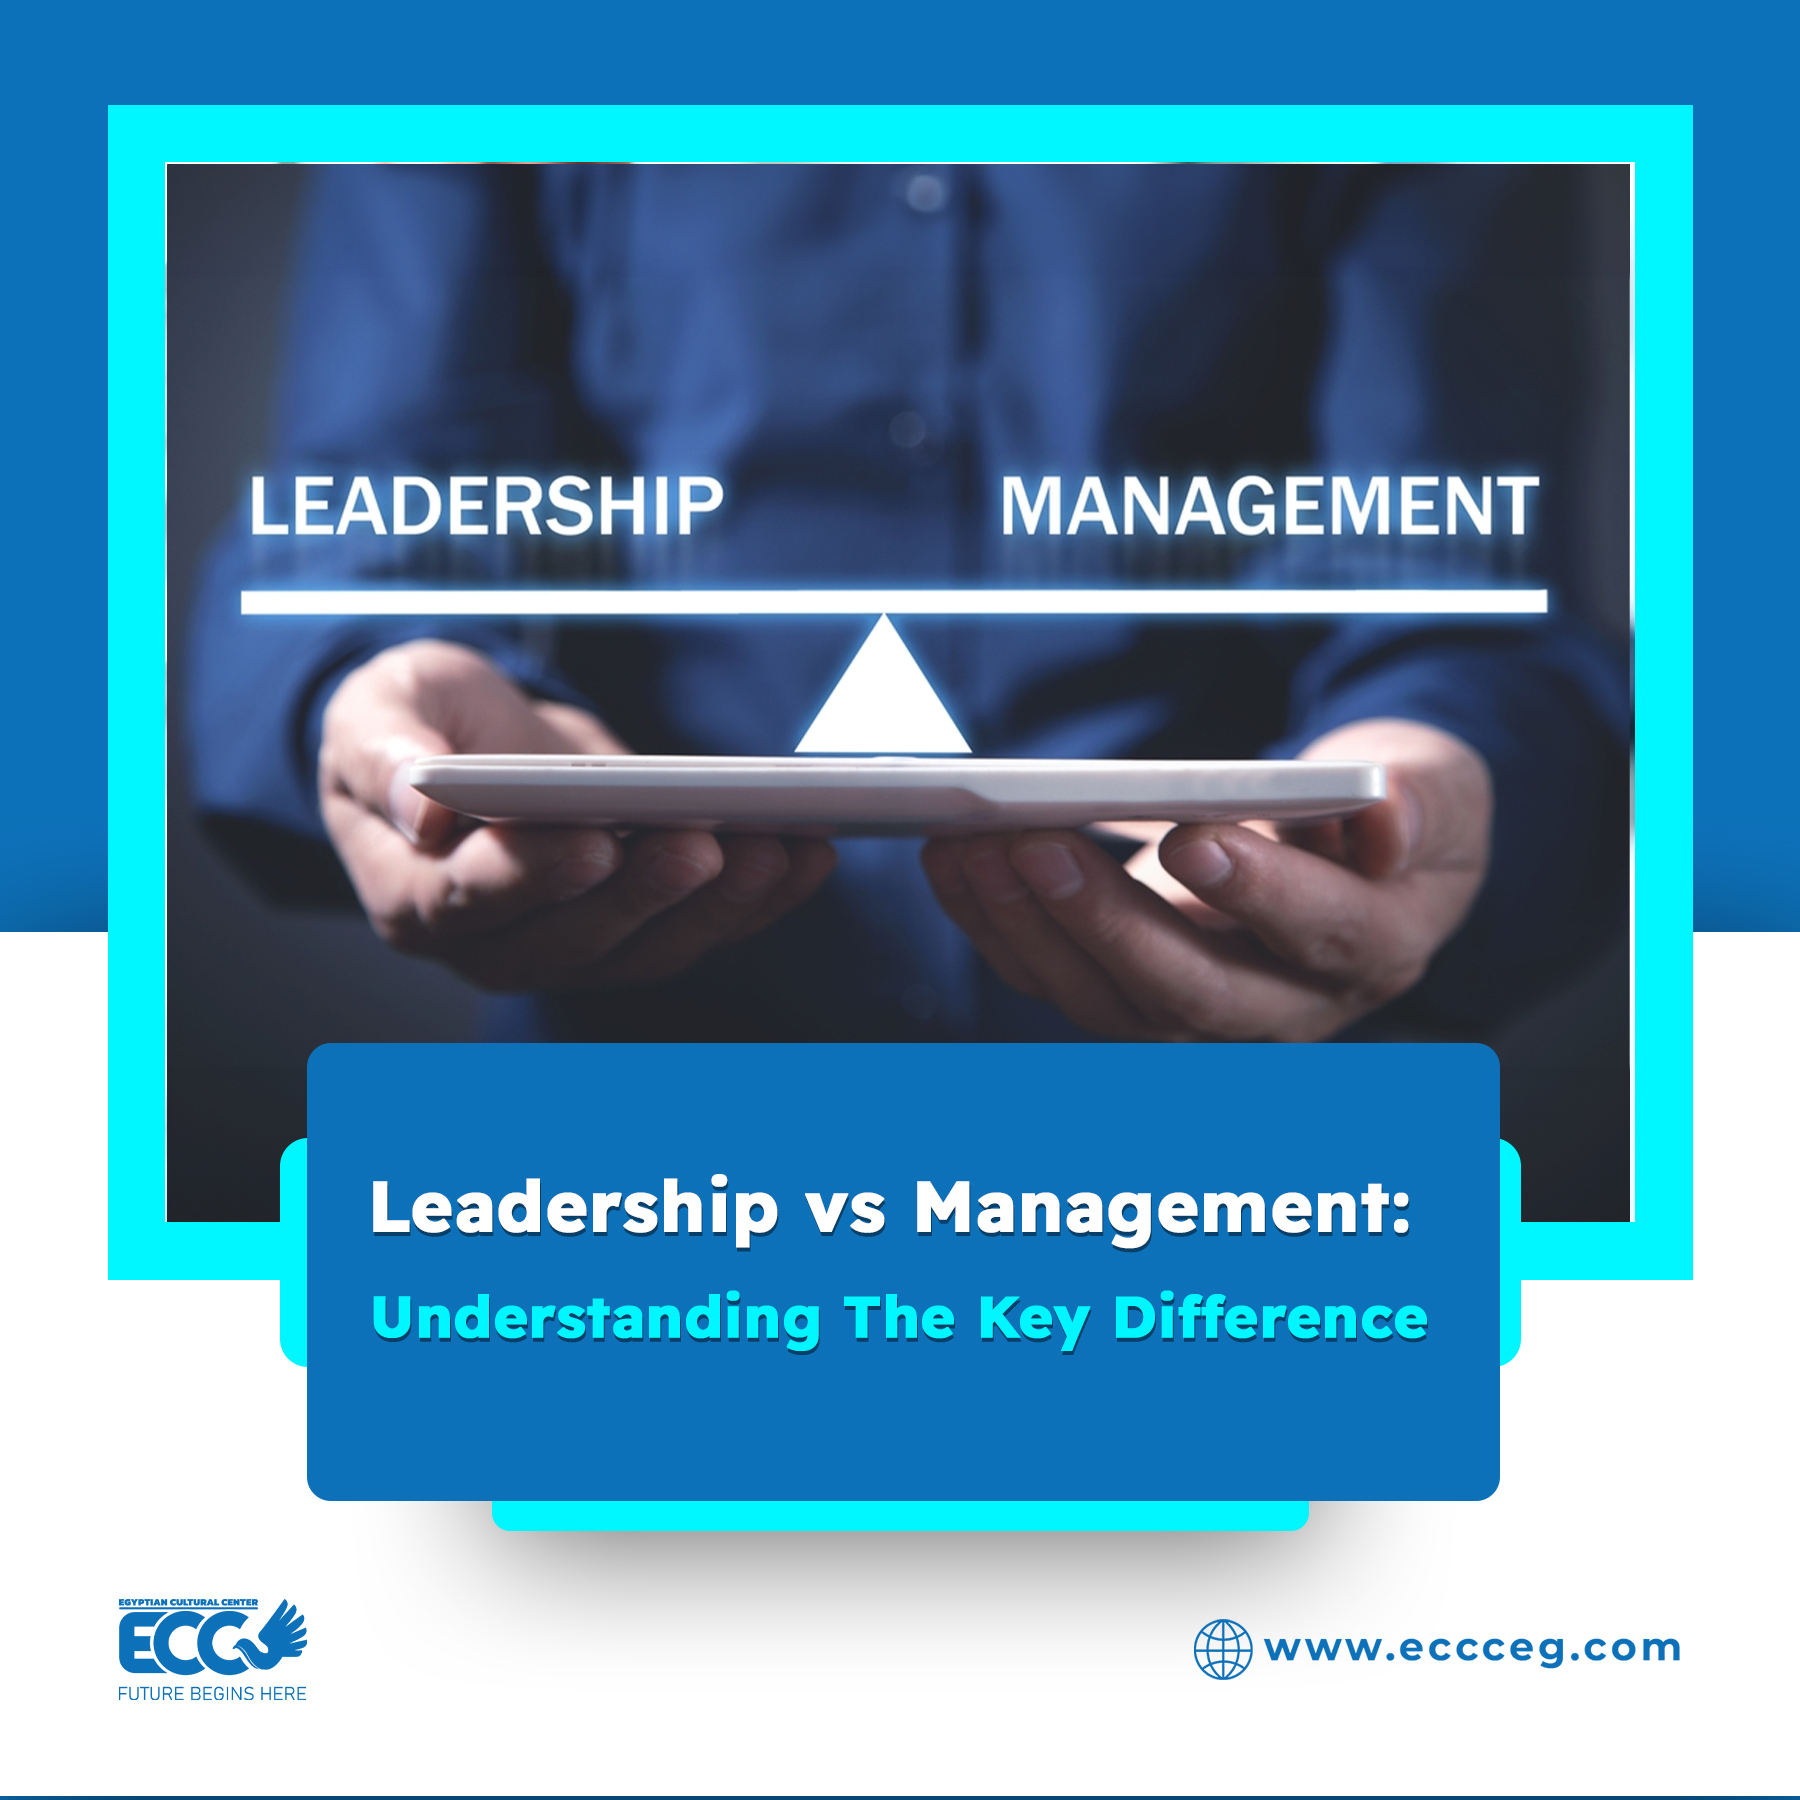 Leadership vs Management: Understanding The Key Difference